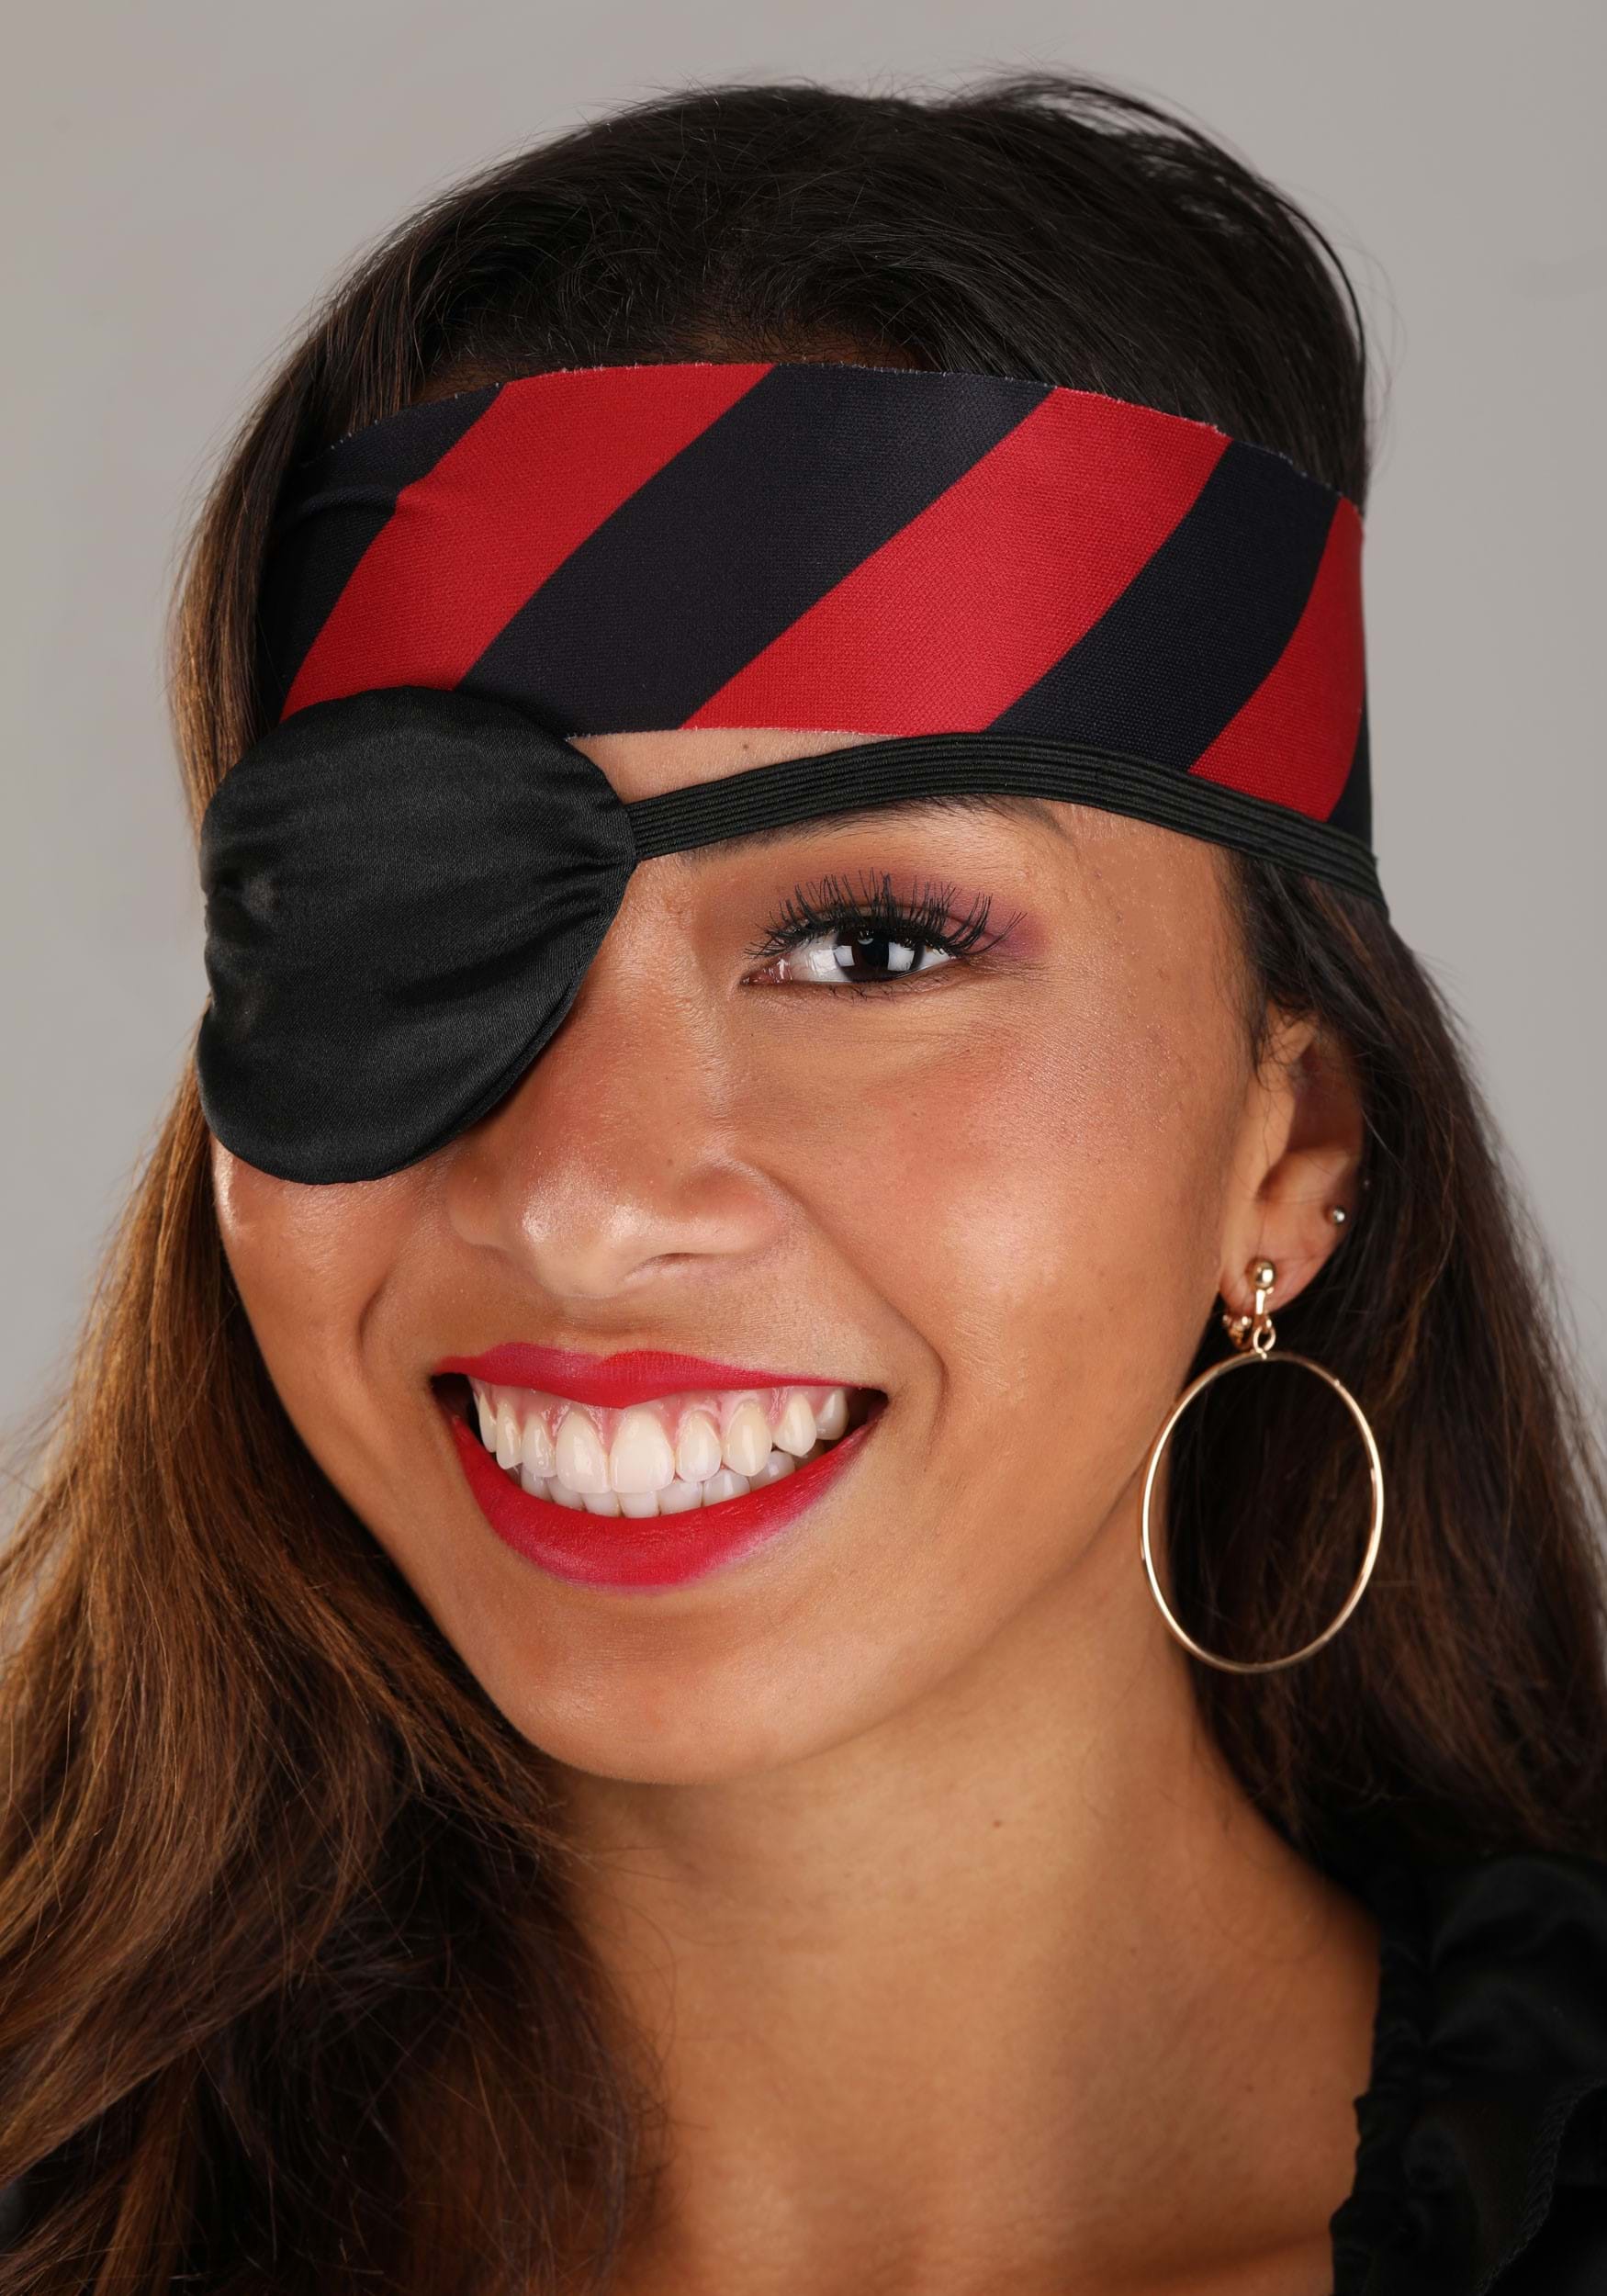 Pirate Eye Patch and Earring Accessory Kit, Size: Standard, Black